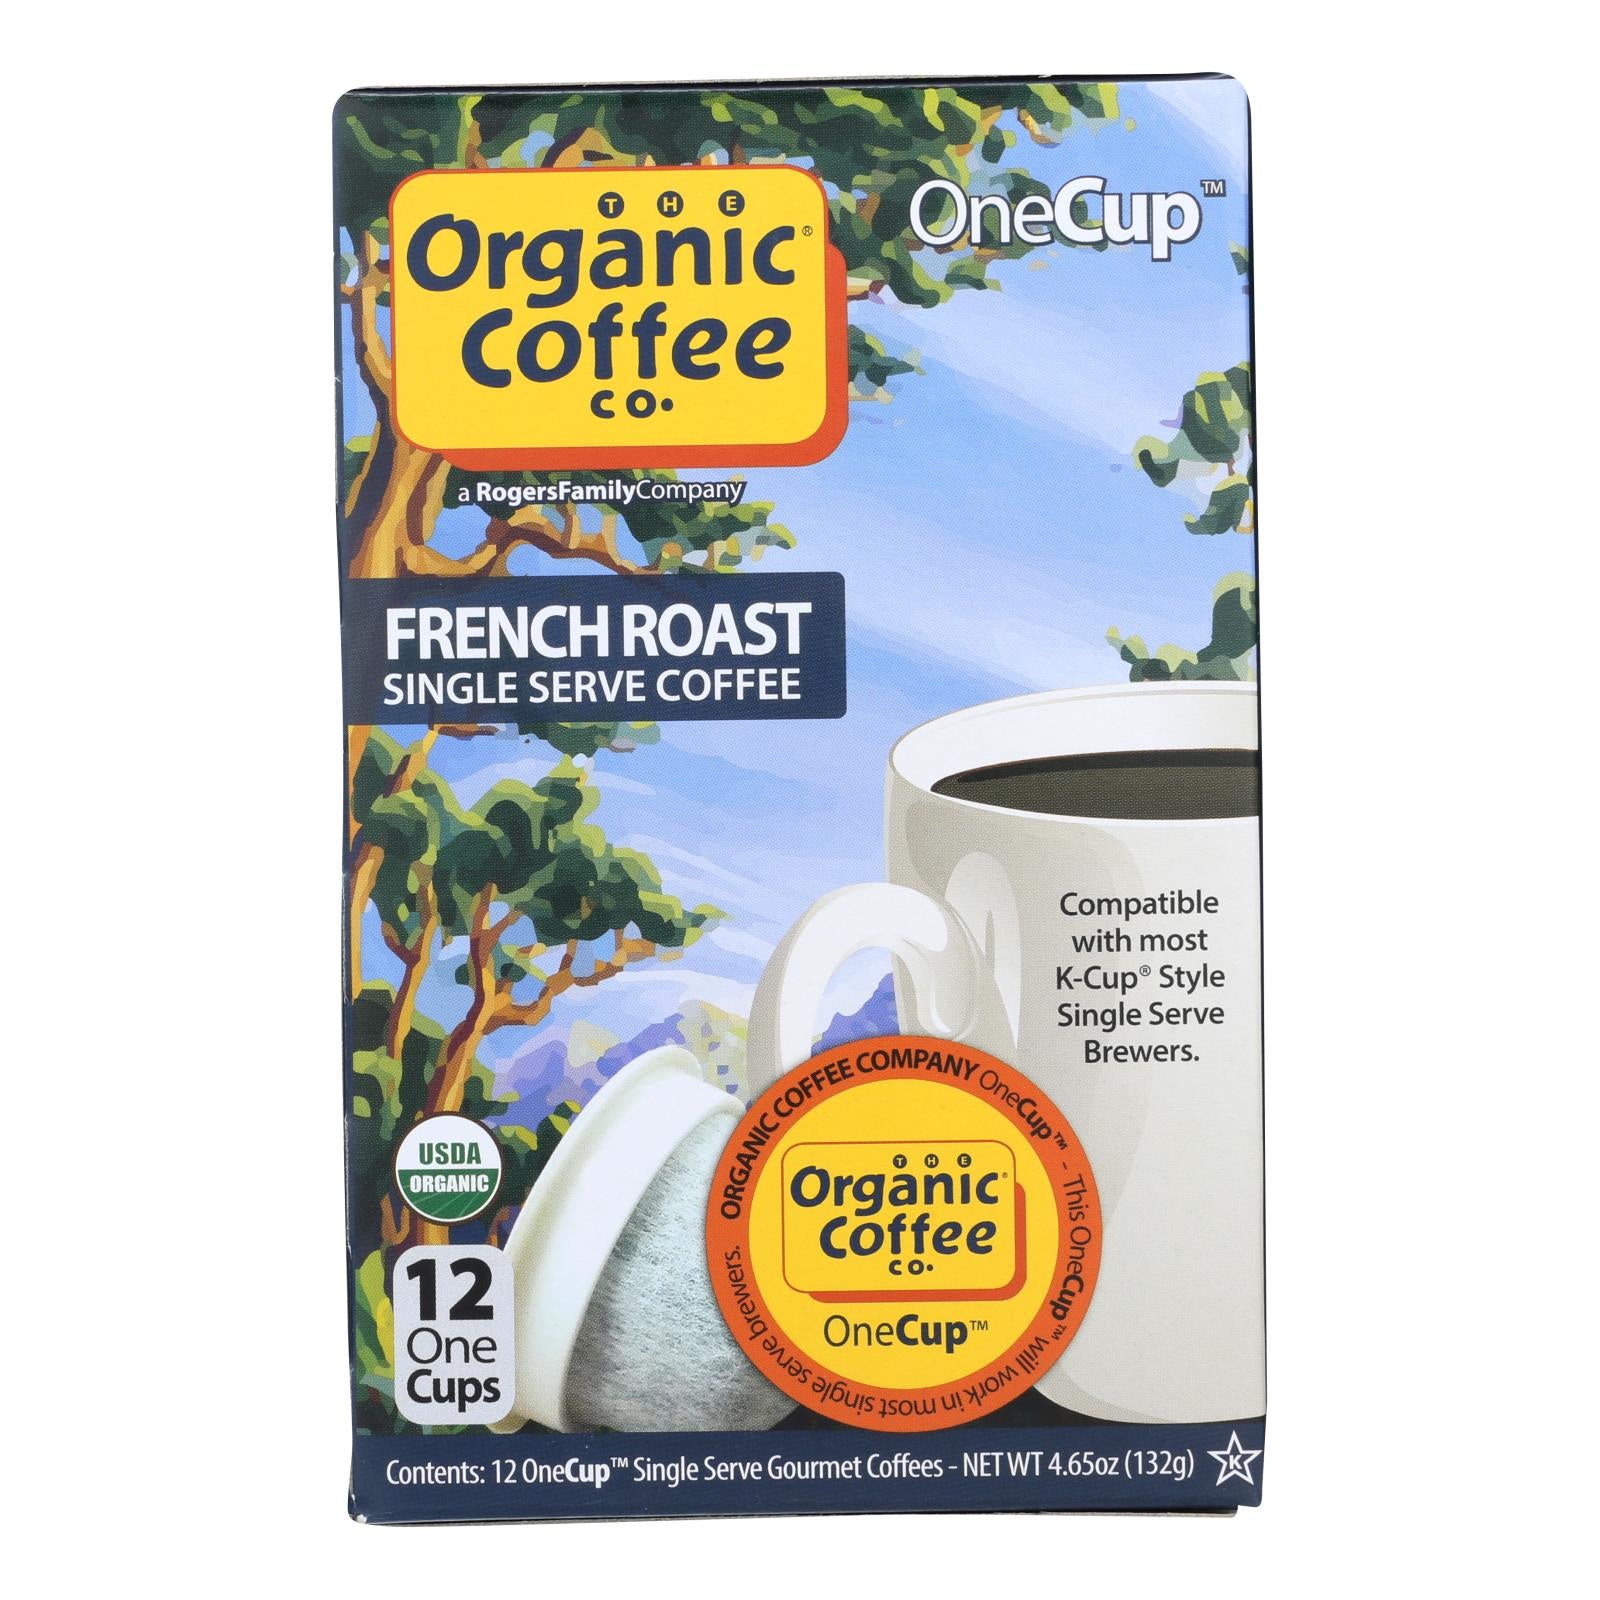 Organic Coffee Company Onecups - French Roast - Case Of 6 - 4.65 Oz.